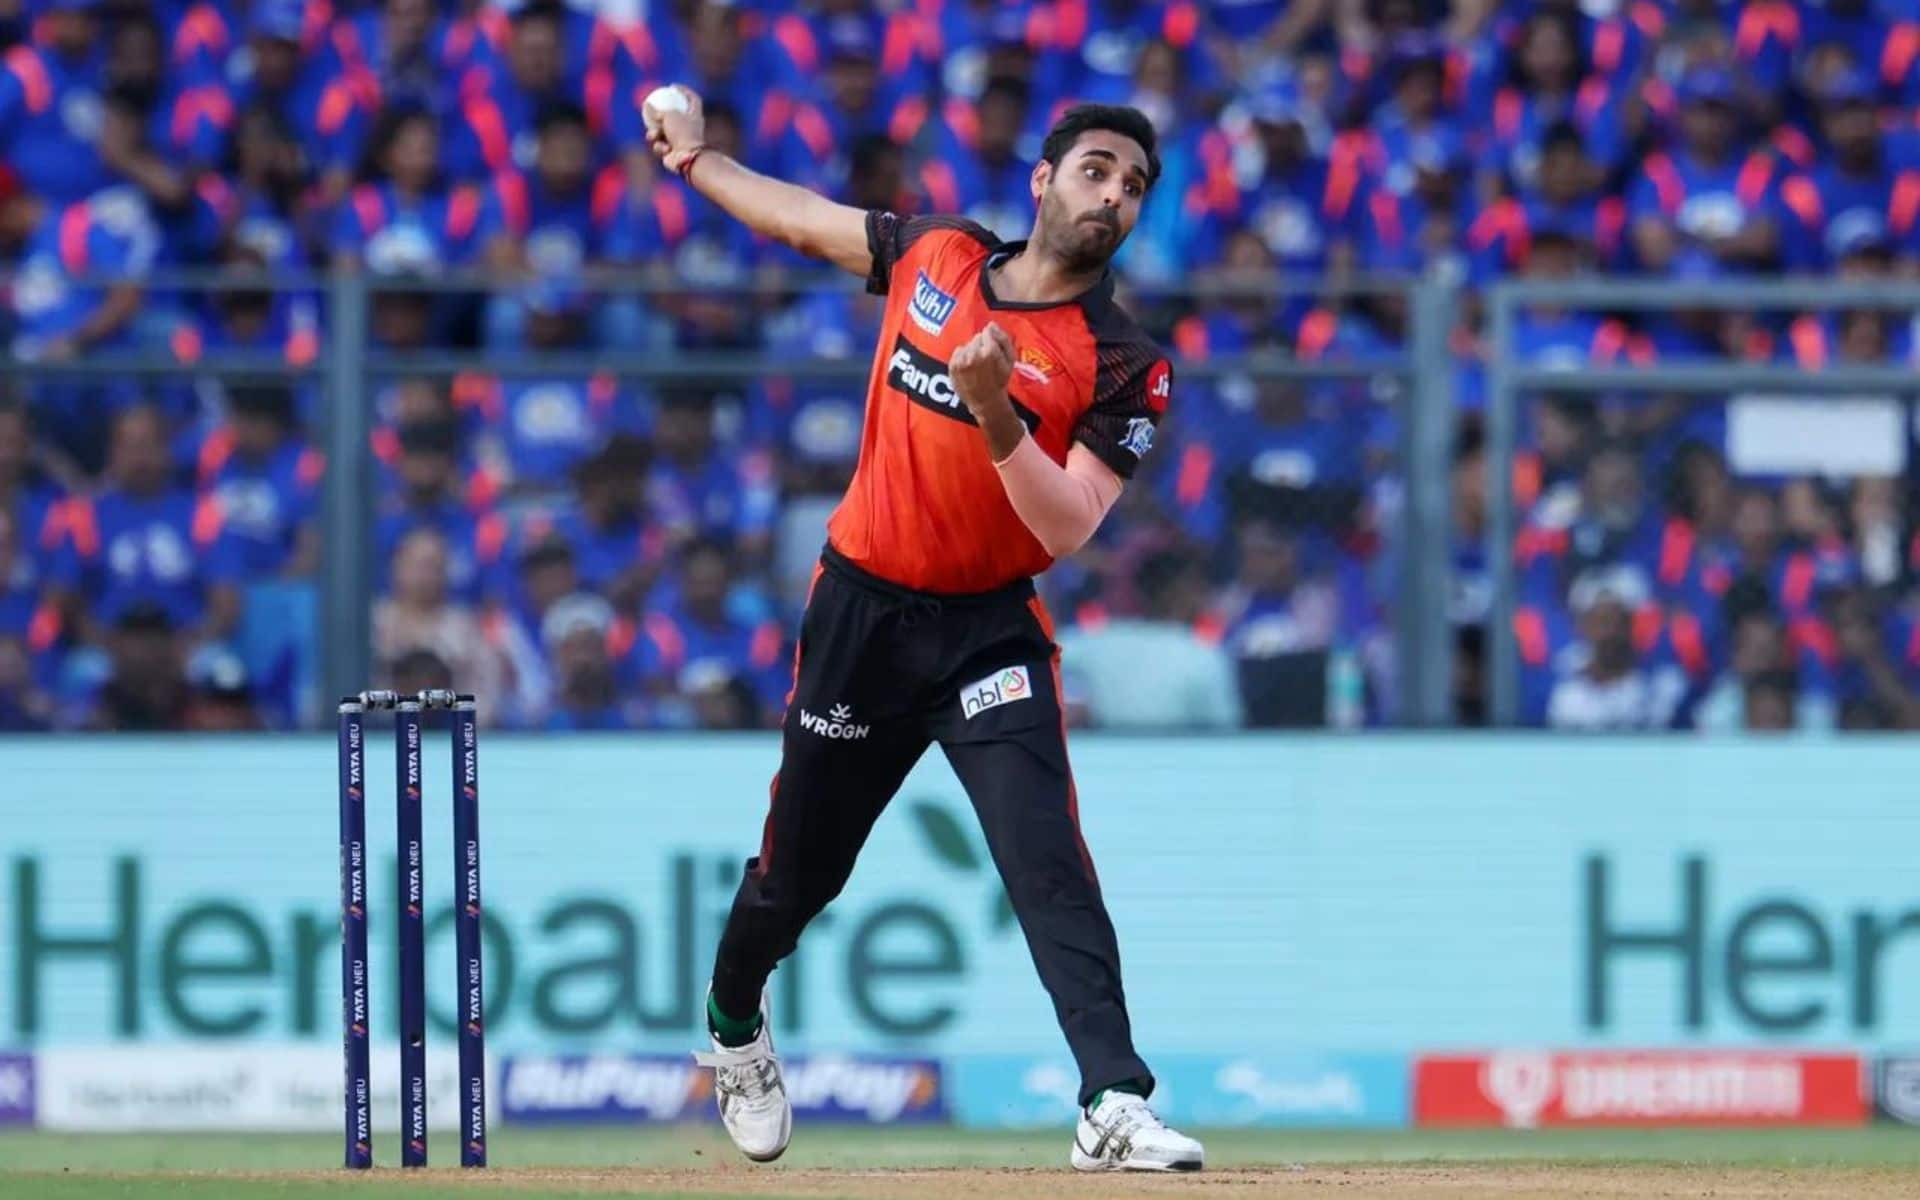  Bhuvneshwar is at the second spot with 12 maiden overs (iplt20)